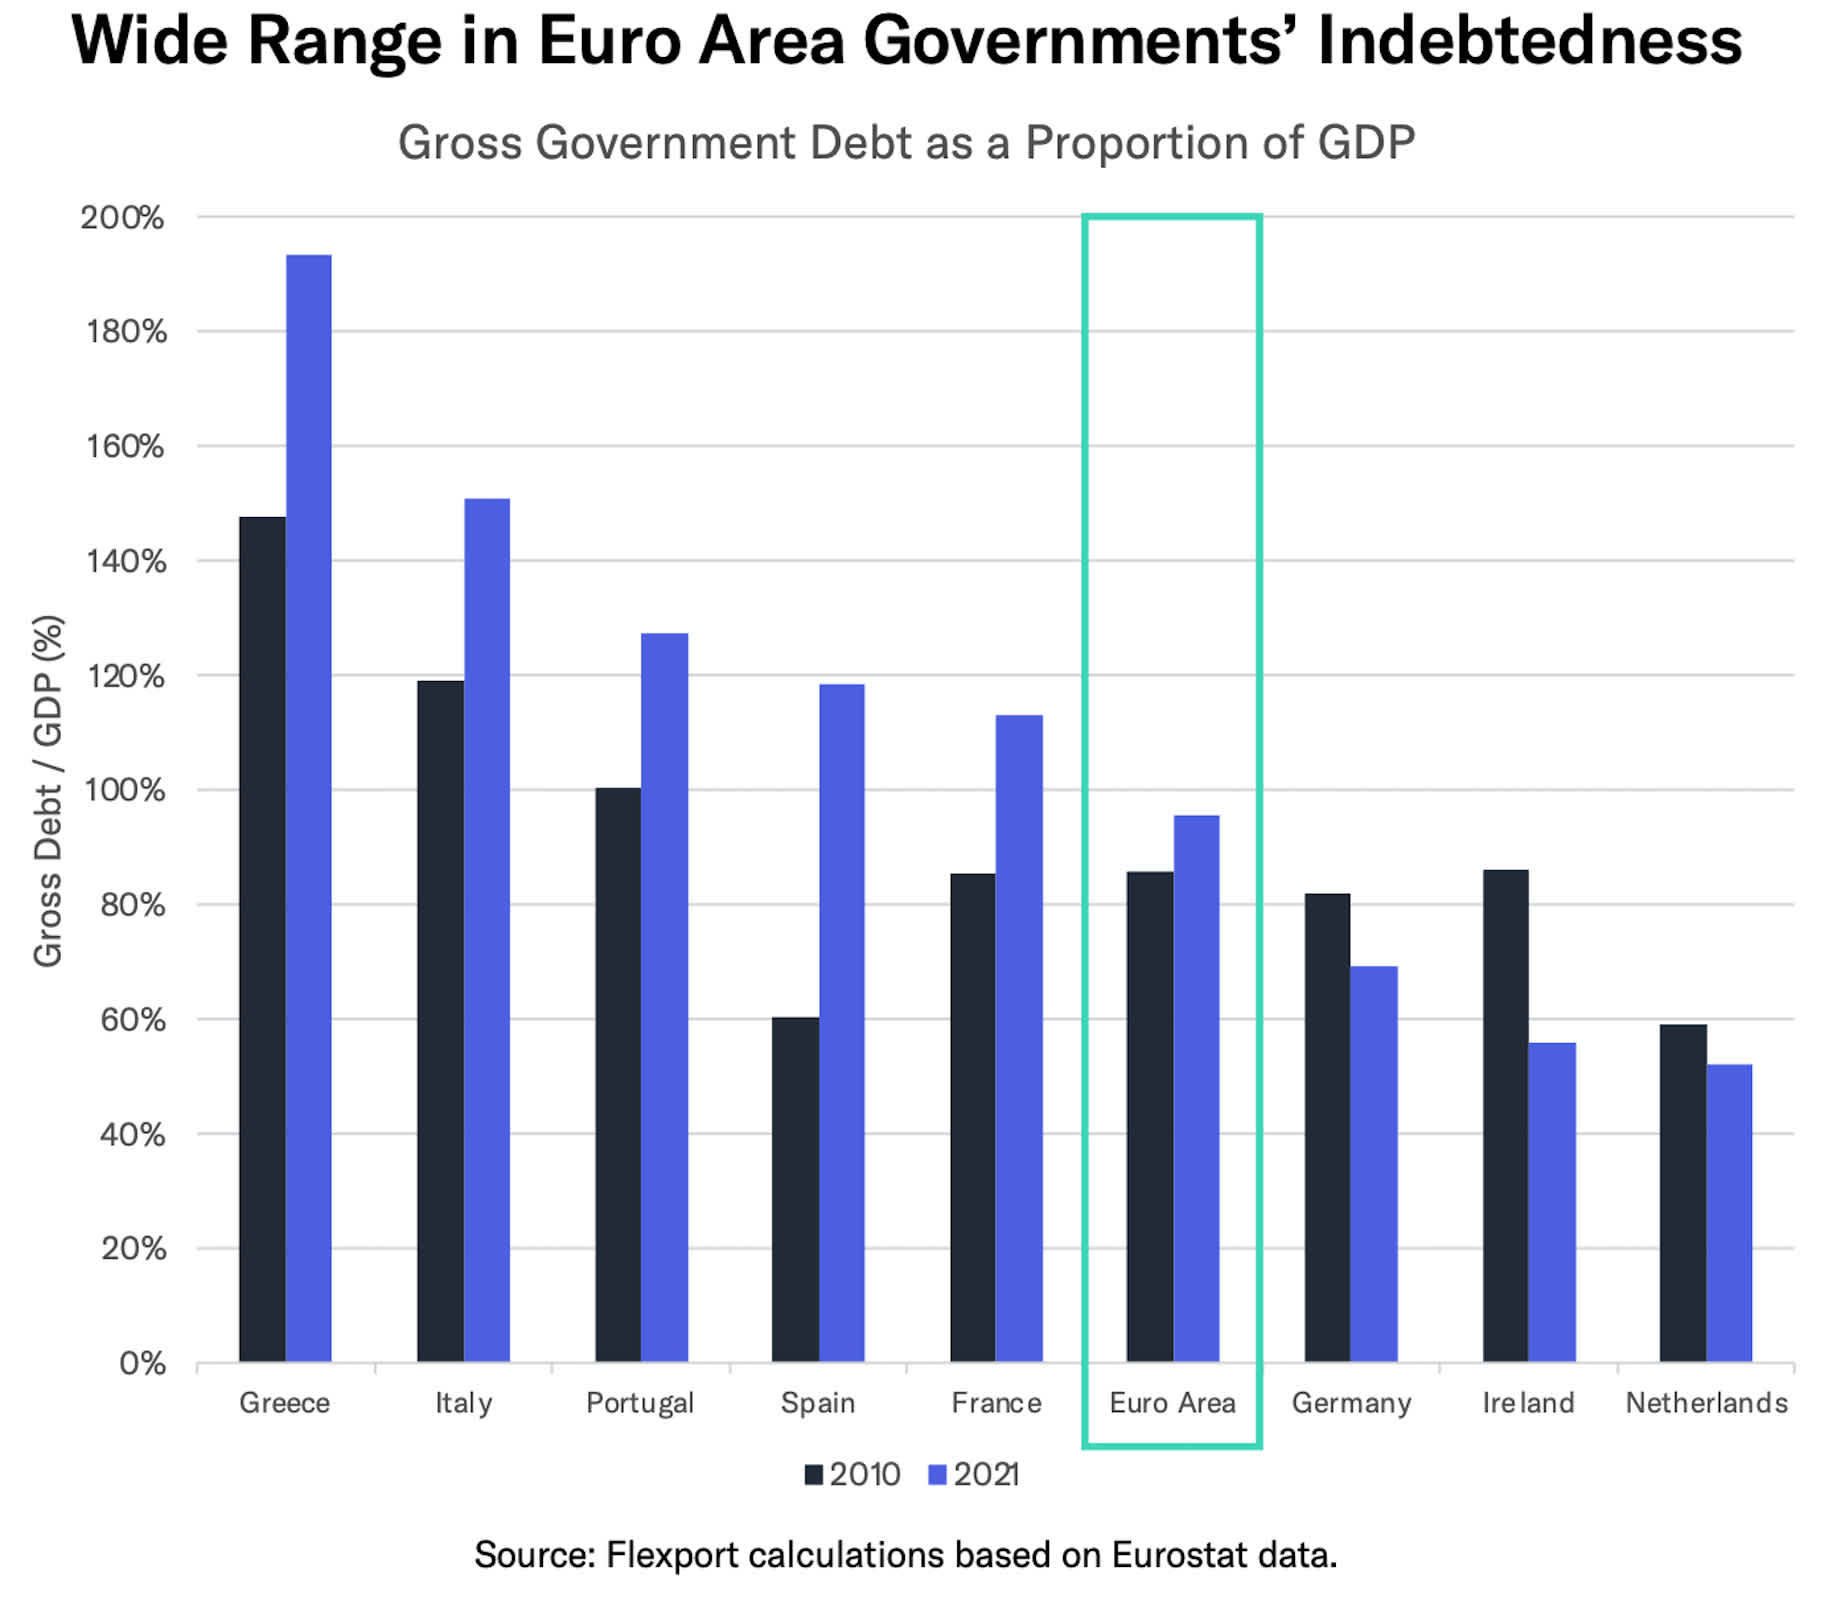 Euro Area government debt divided by gross domestic product in 2022 and 2010 to illustrate the challenges for the ECB in managing monetary policy.